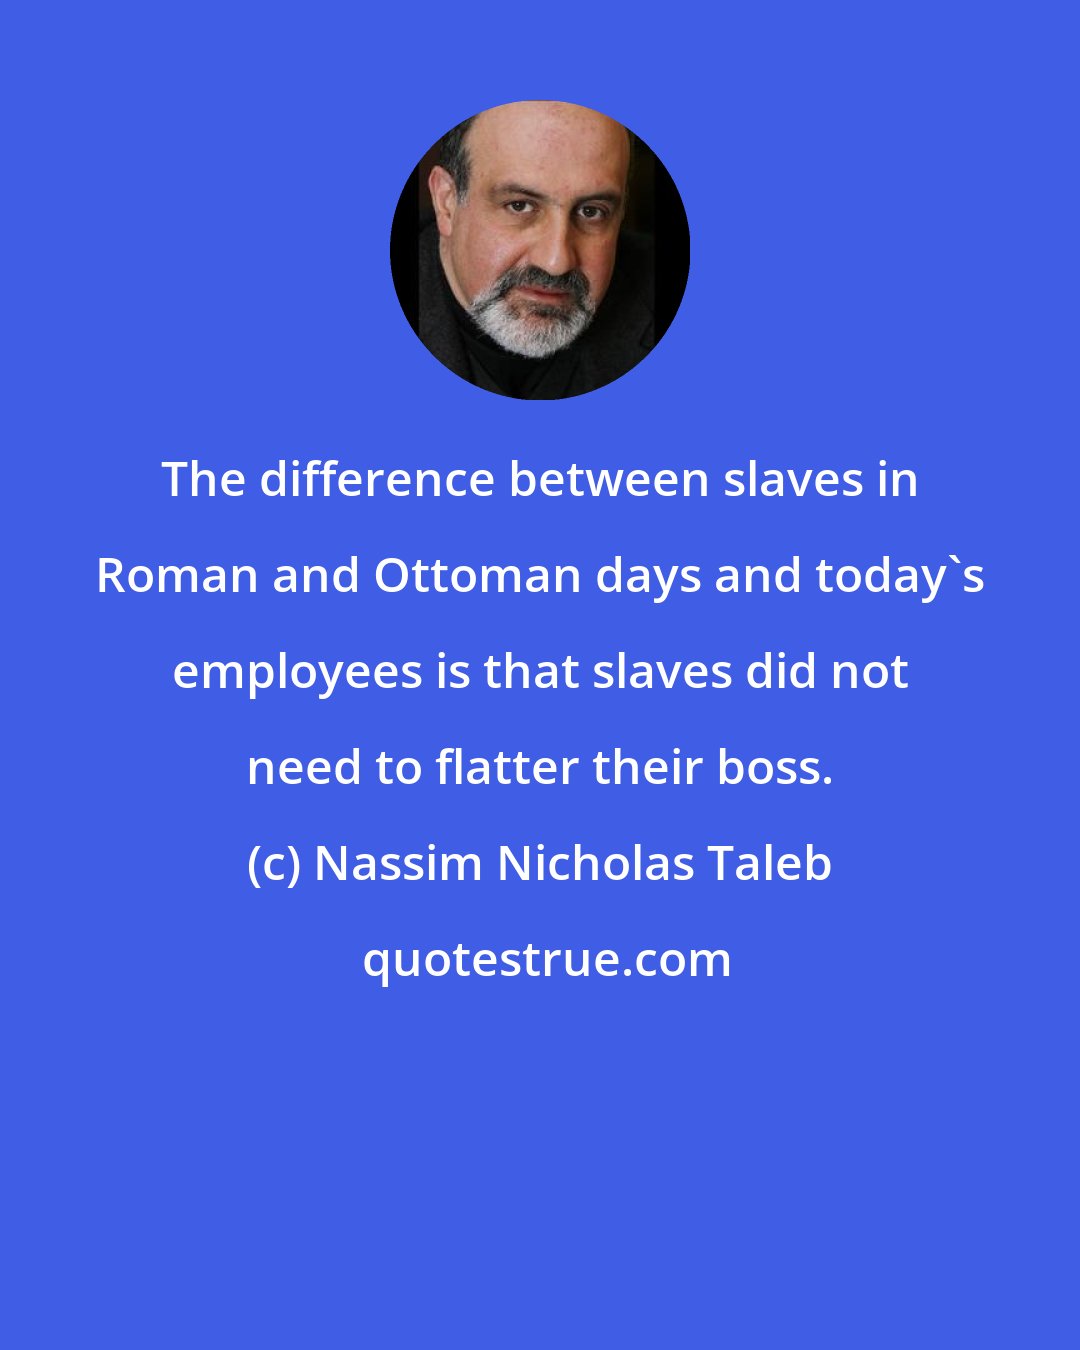 Nassim Nicholas Taleb: The difference between slaves in Roman and Ottoman days and today's employees is that slaves did not need to flatter their boss.